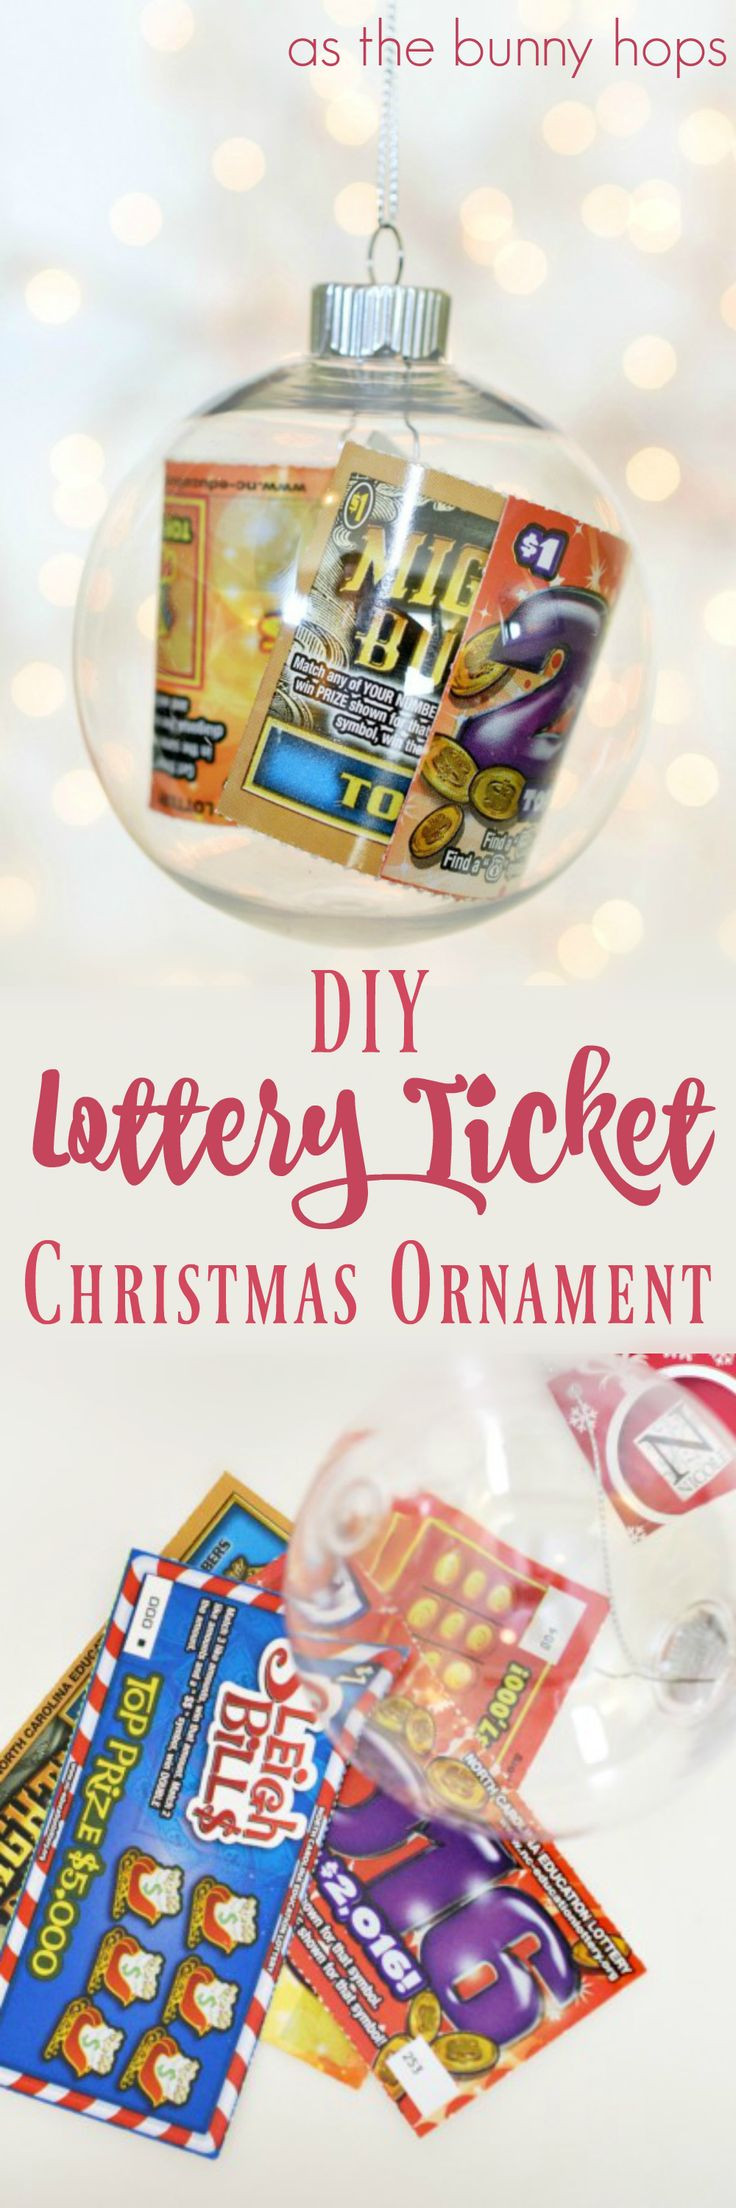 Lottery Ticket Christmas Gift Ideas
 The 25 best Lottery ticket christmas t ideas on